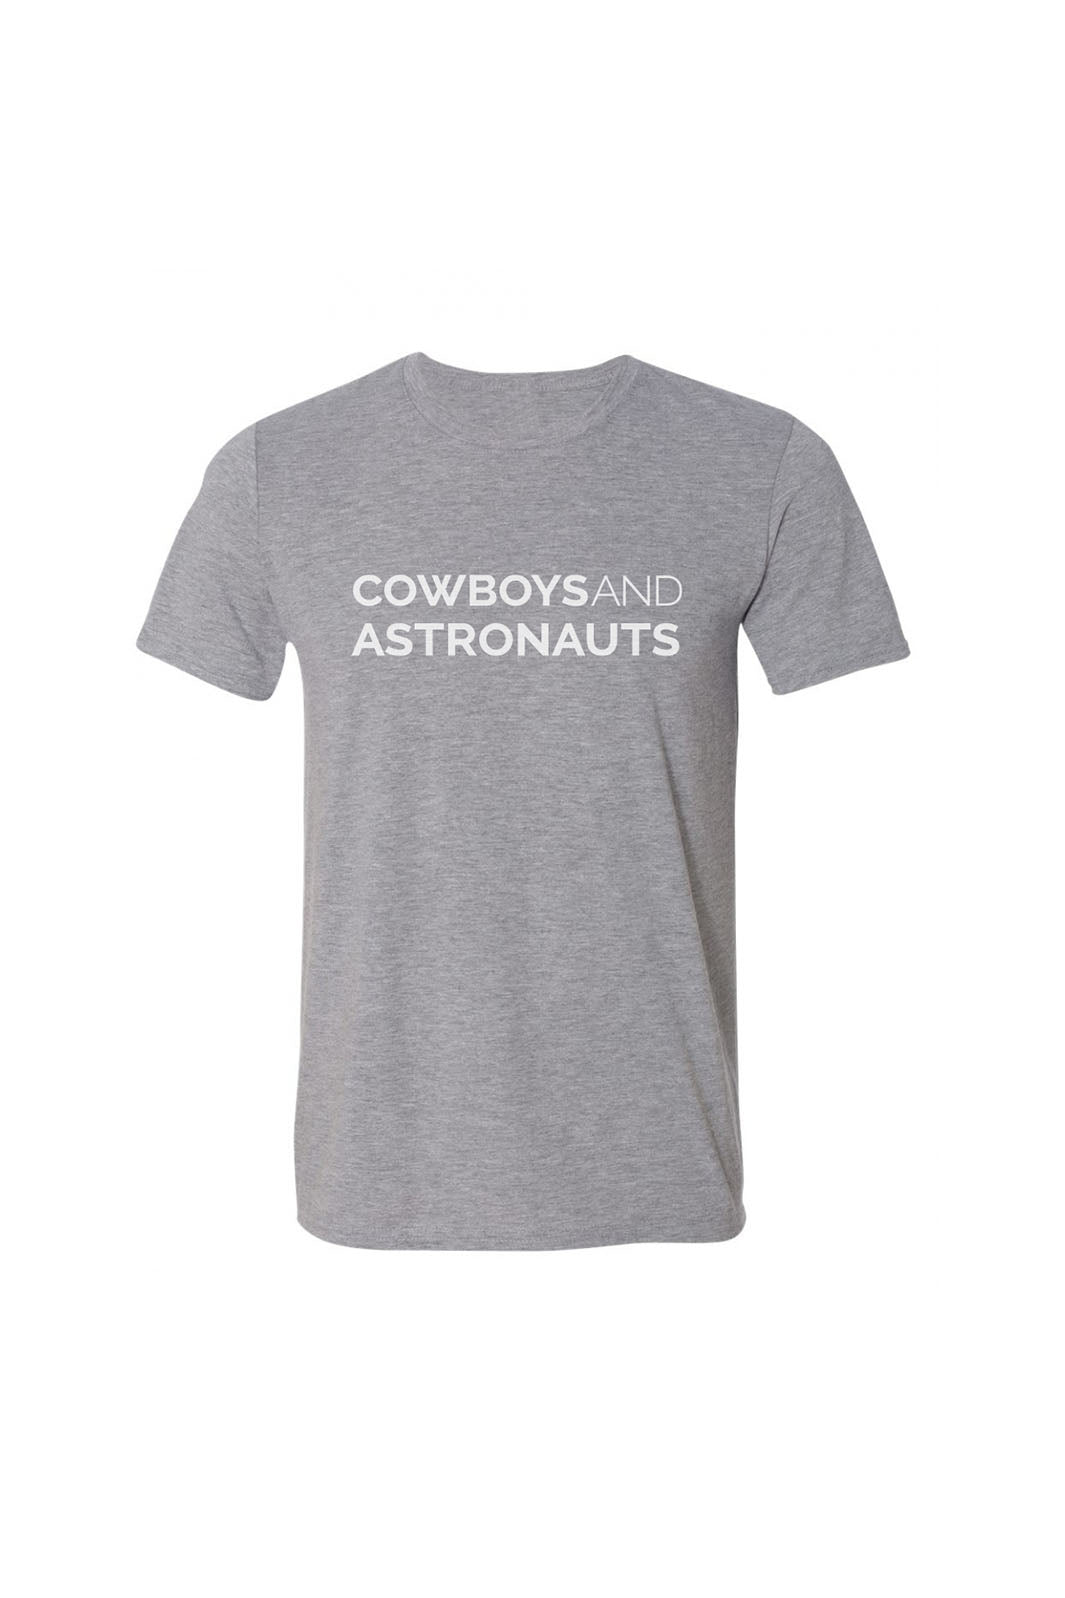 Heather Grey T-shirt with Cowboys and Astronauts logo. 